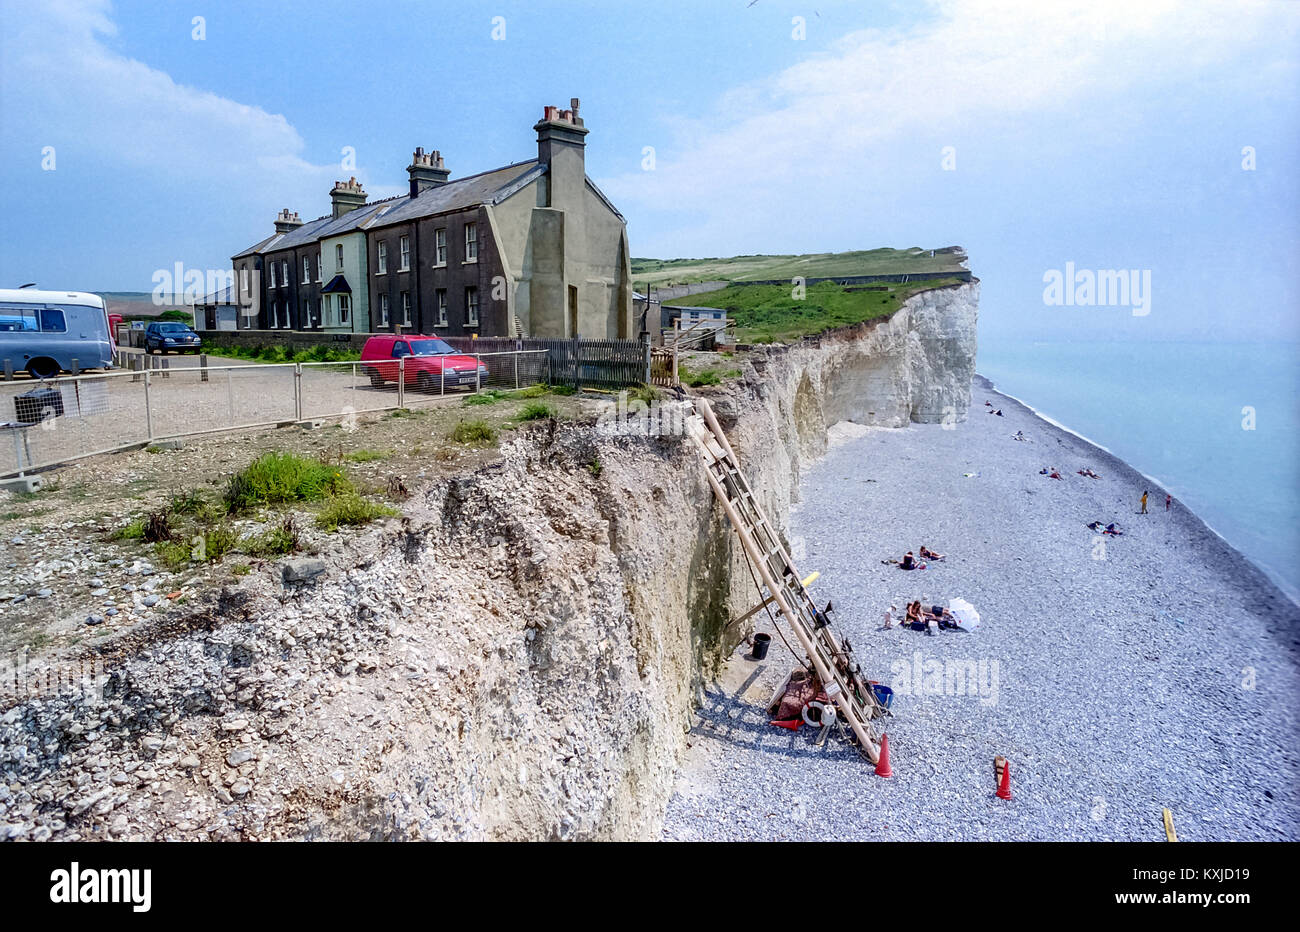 The Beach And Coastguard Cottages At Birling Gap Near Eastbourne